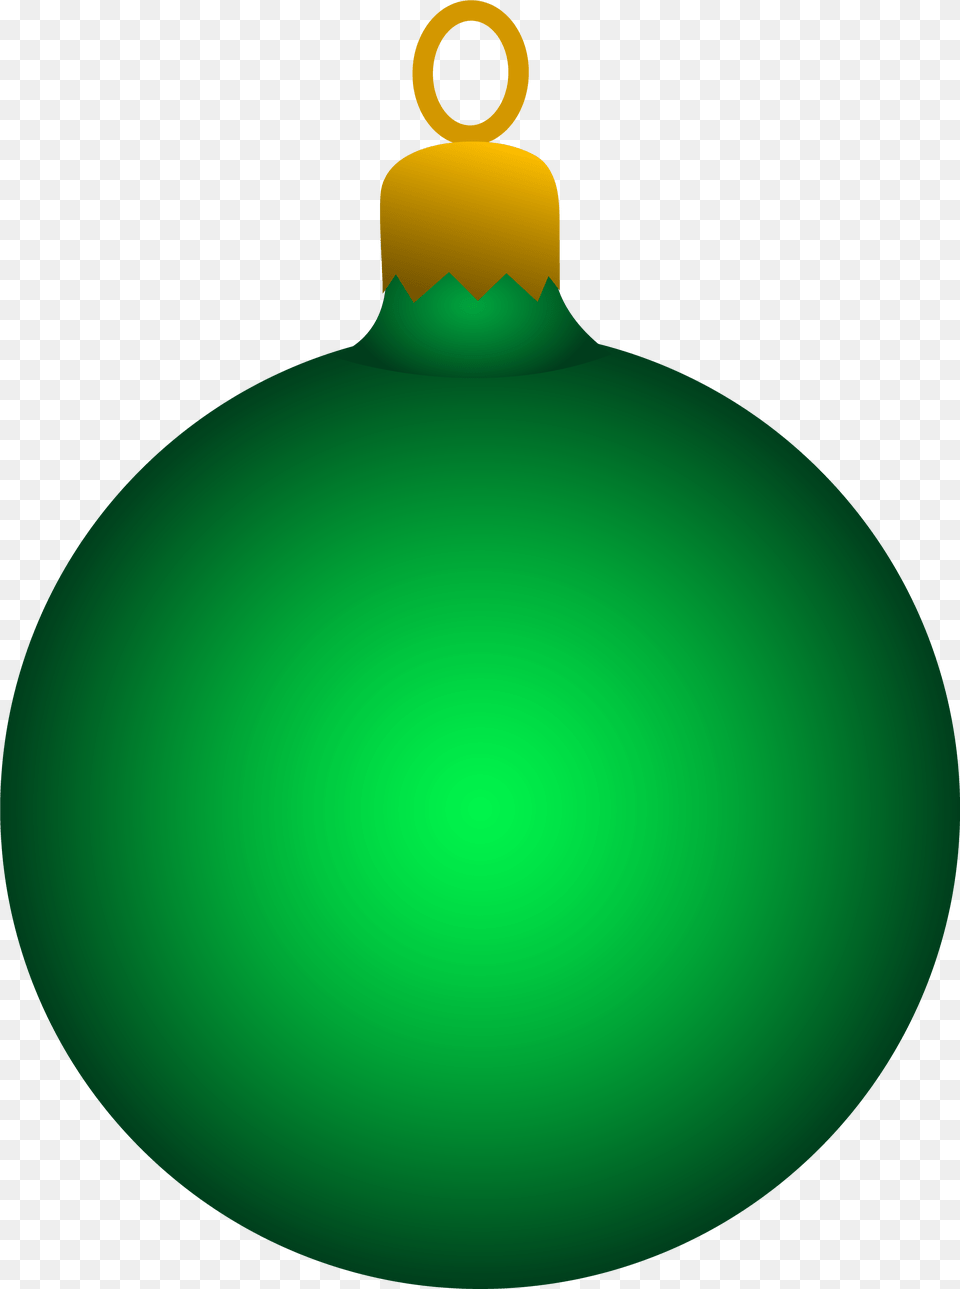 Ornament Christmas Tree Transparent U0026 Clipart Free Green Christmas Ornament Clipart, Accessories, Sphere, Lighting, Jewelry Png Image